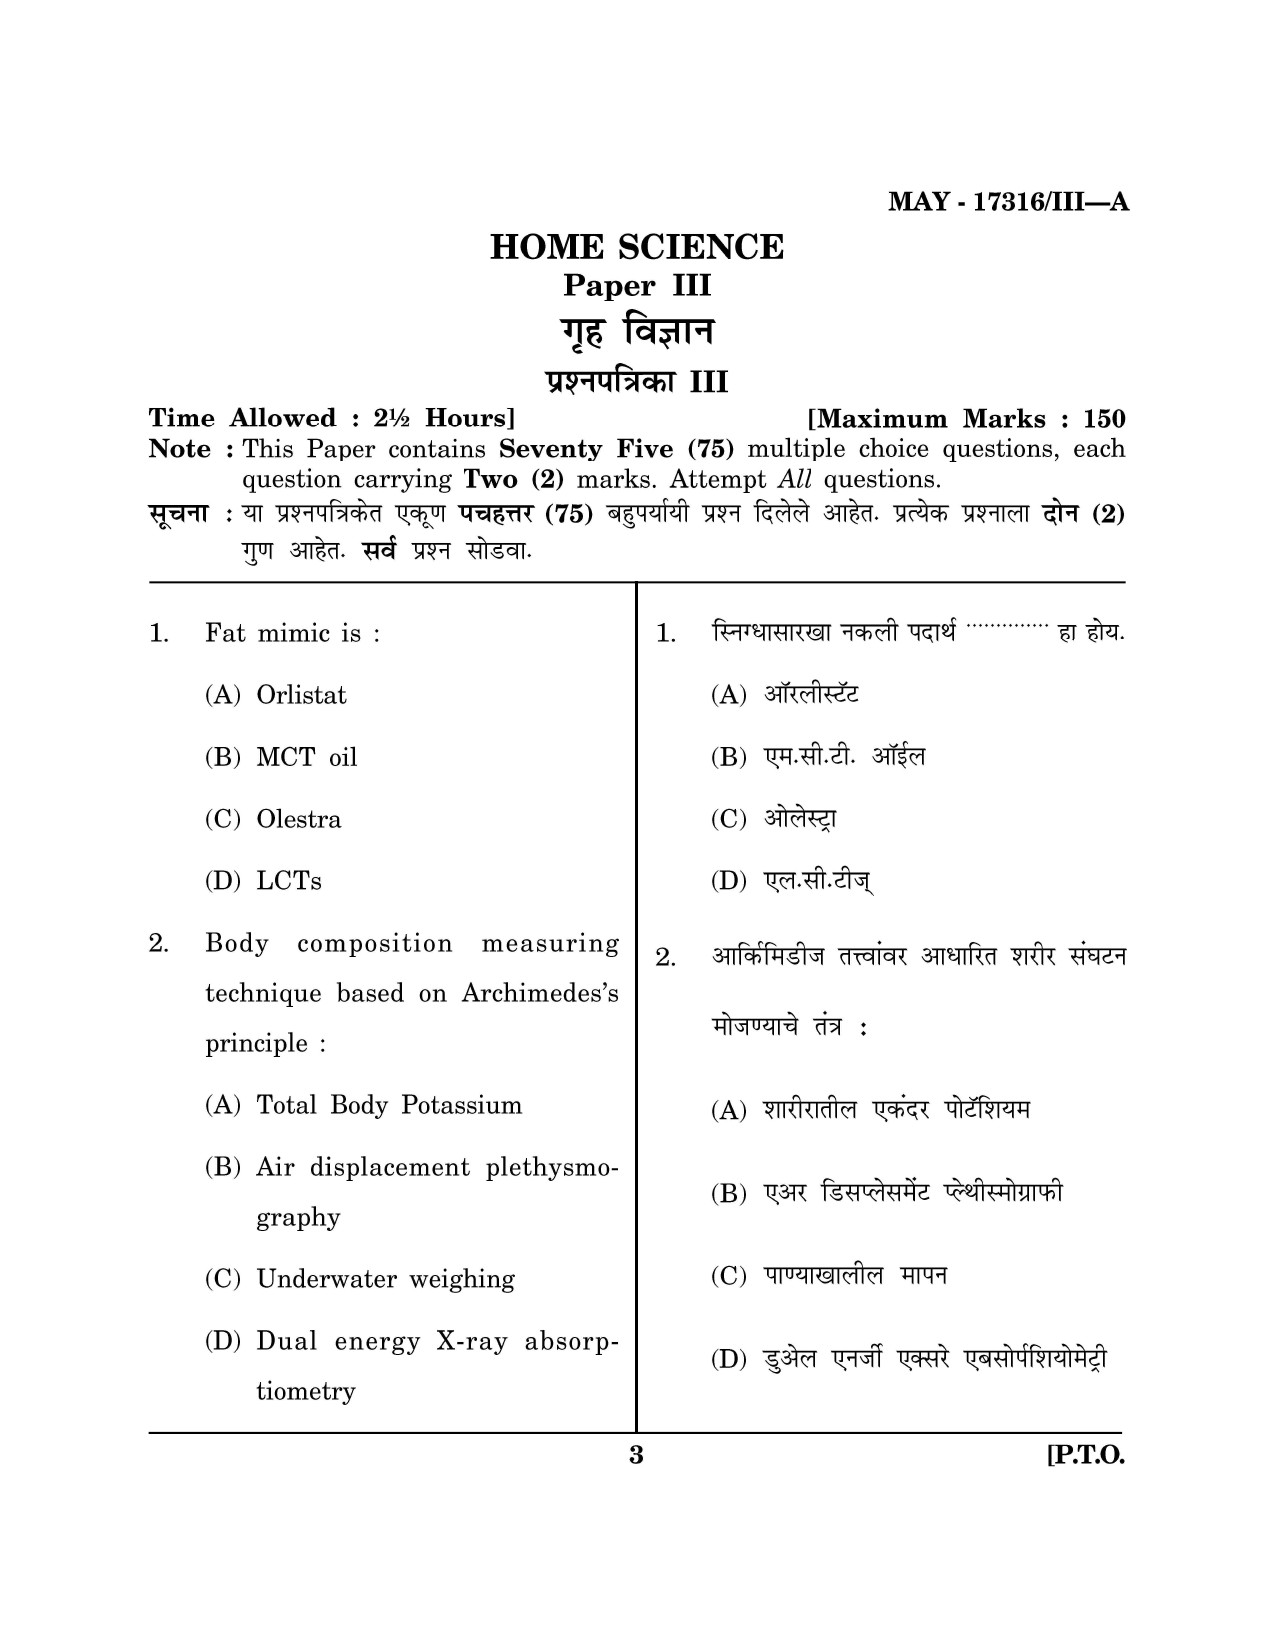 Maharashtra SET Home Science Question Paper III May 2016 2